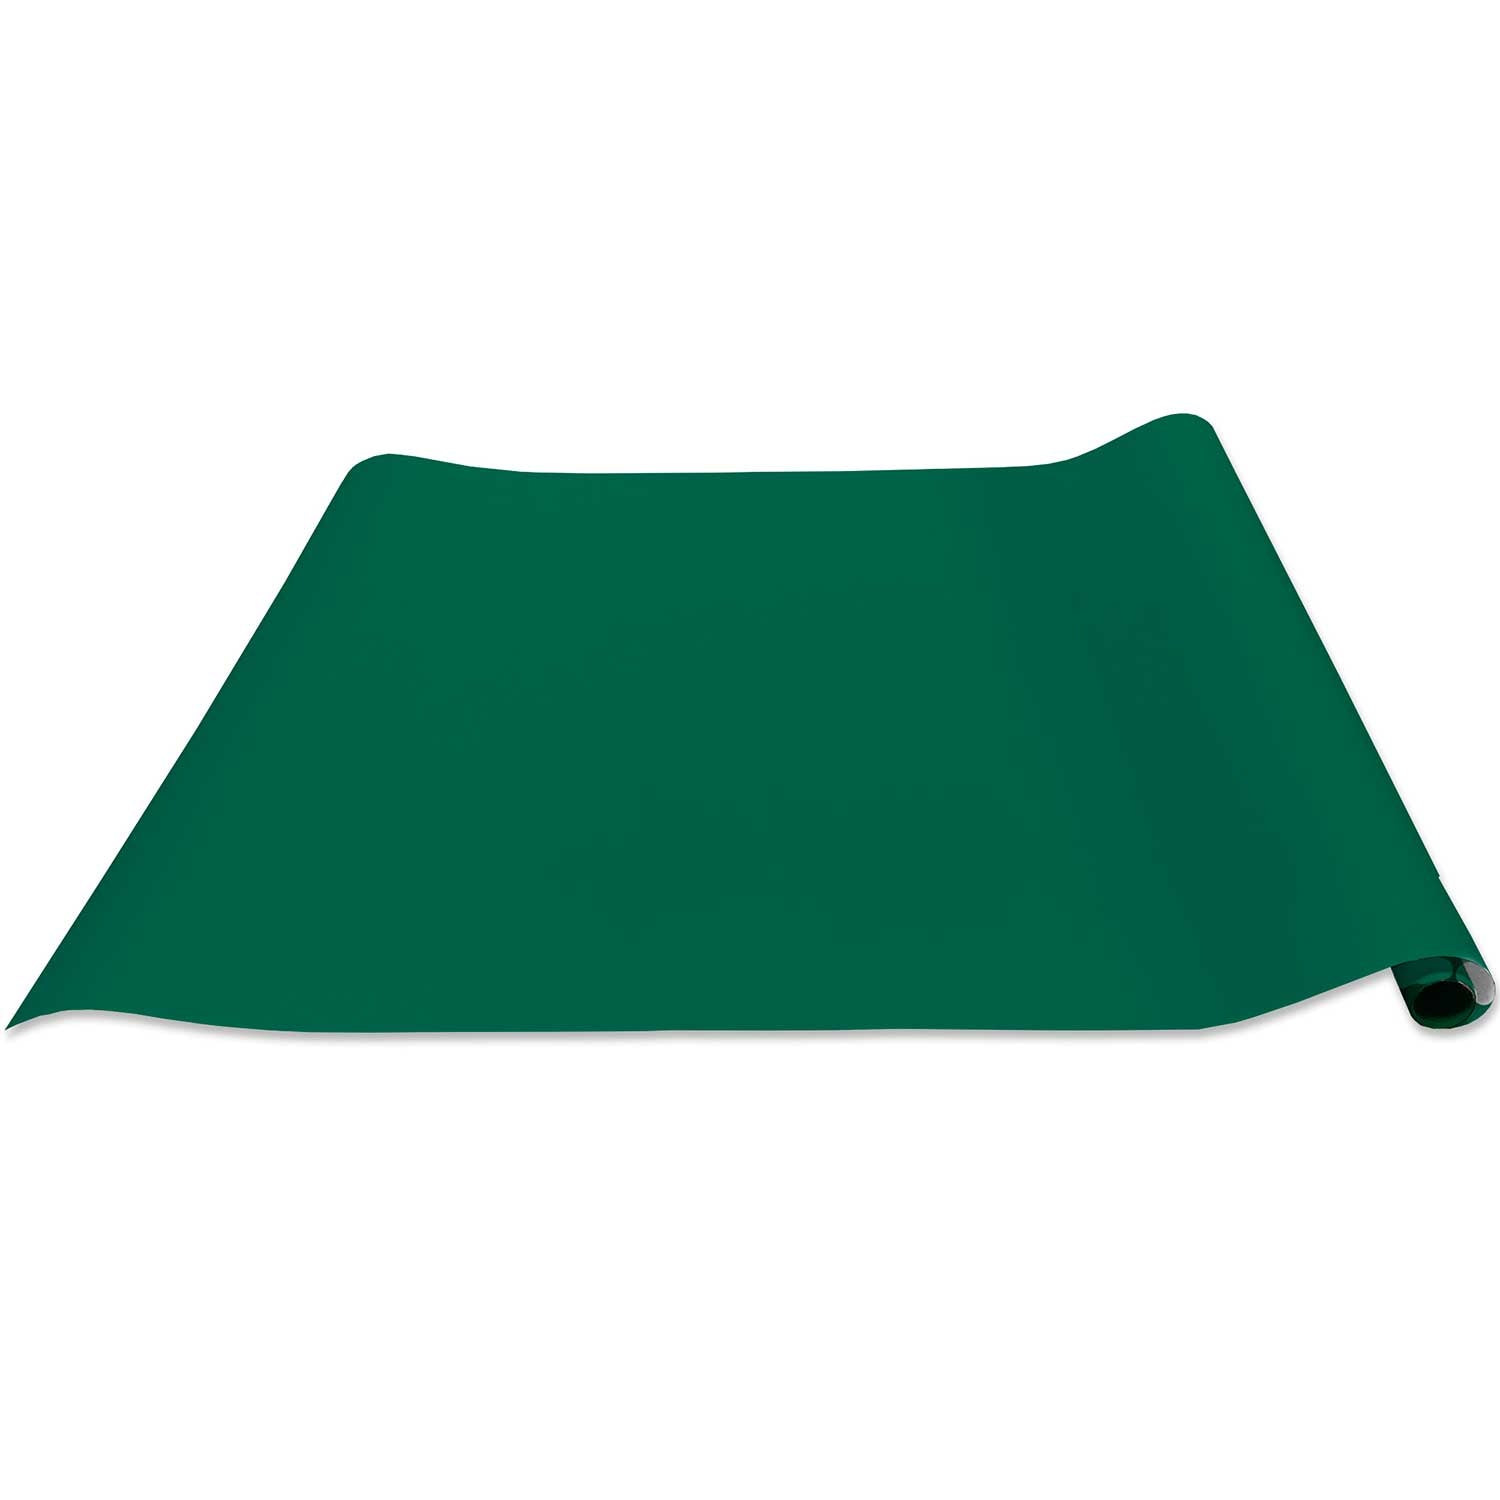 Dark Green Gift Wrapping Paper 26 x 417', Half Ream Roll